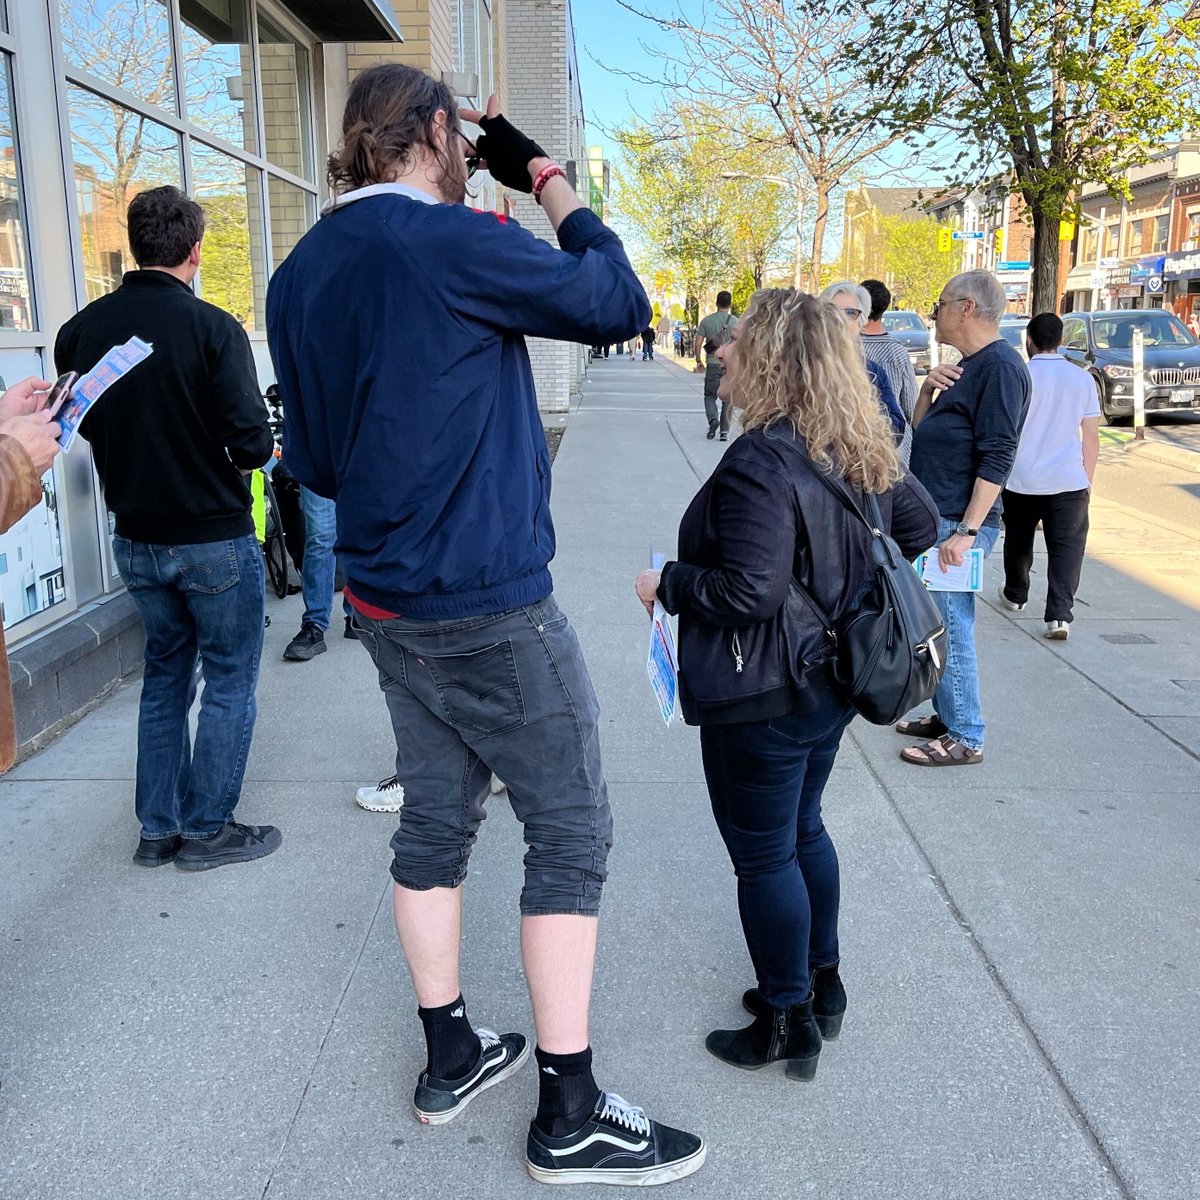 🔥 We collected 100+ signatures supporting LCBO workers' demands for decent wages, ending involuntary part-time hours & to keep the LCBO public.
✅ LCBO revenue should fund health care & education. 
😡 Let's not give $2.5 billion to corporations.
#KeepLCBOpublic #Justice4Workers